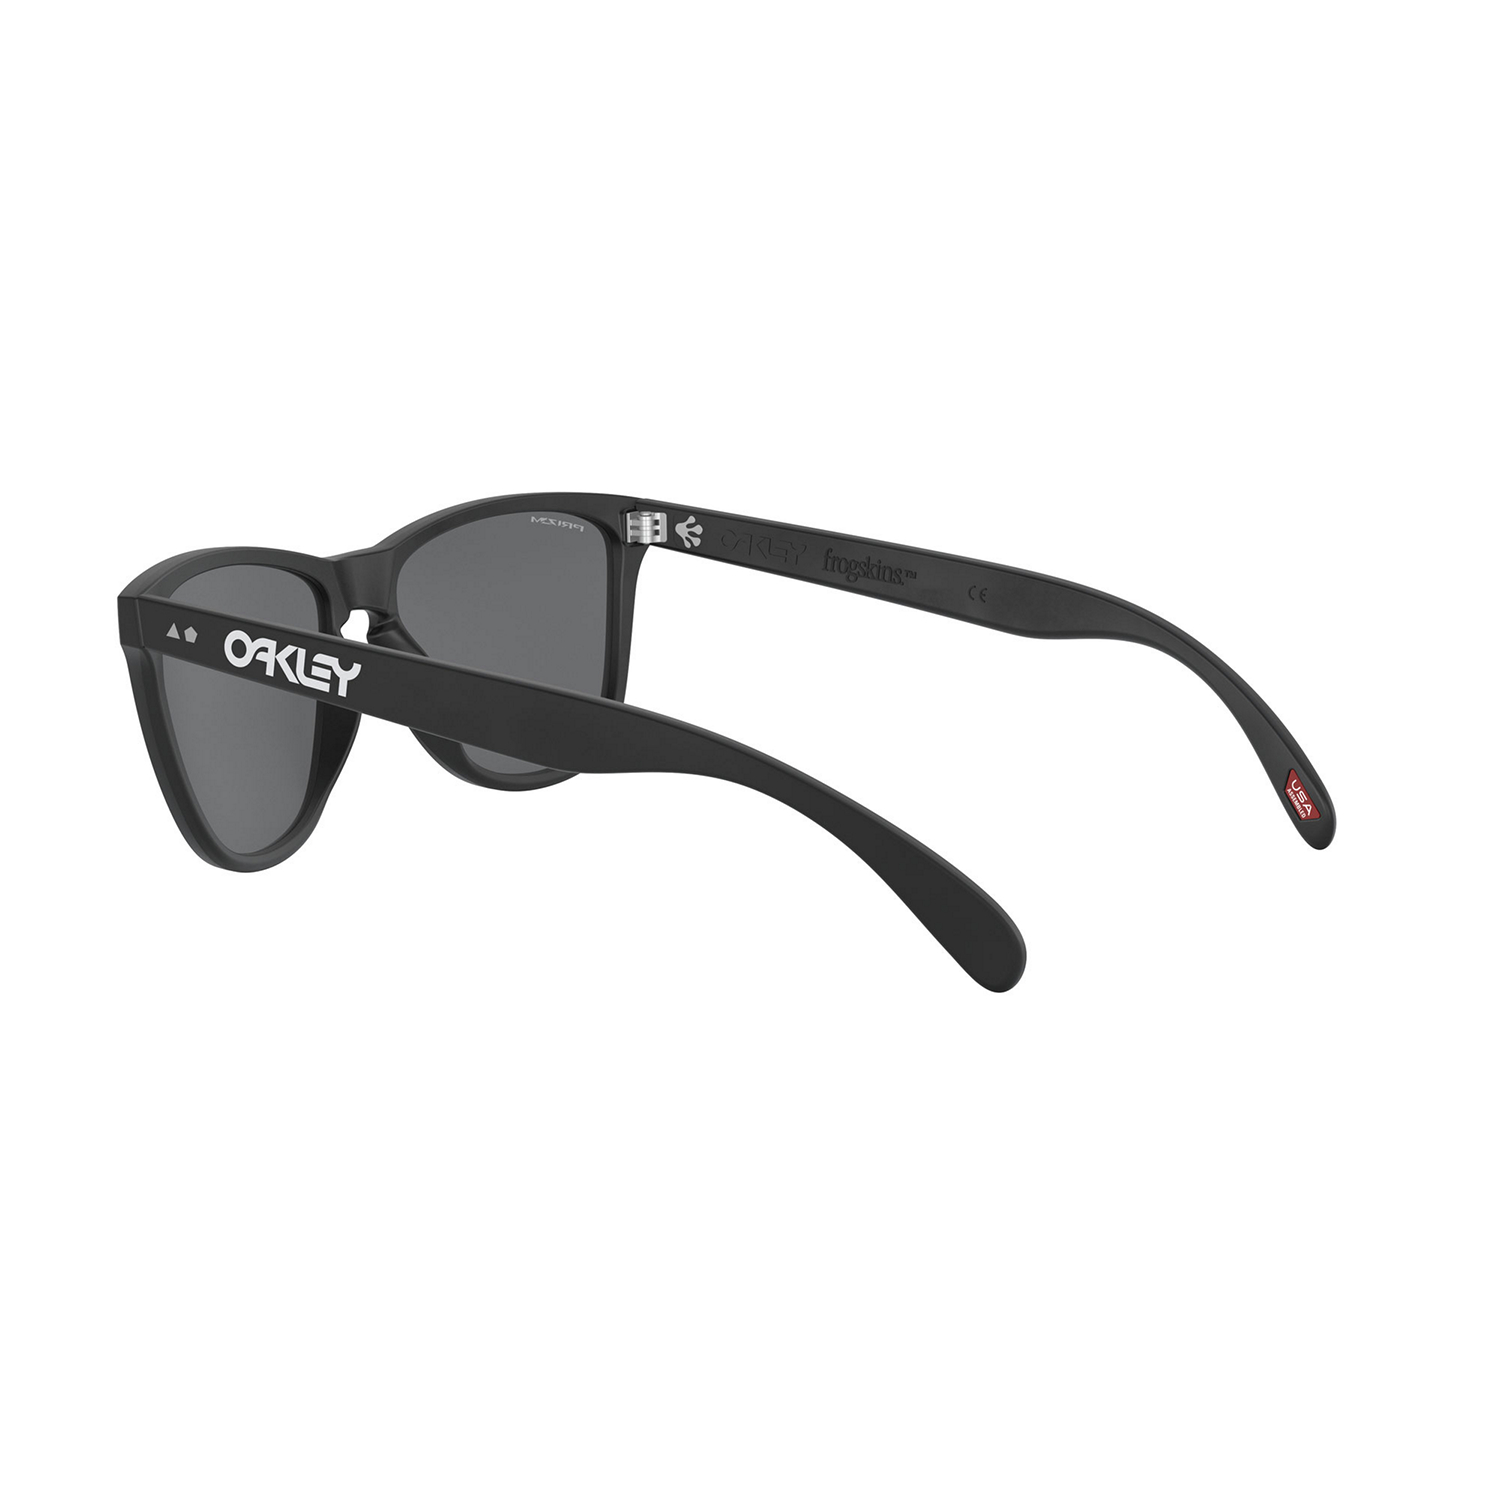 FROGSKINS 35th Round Sunglasses